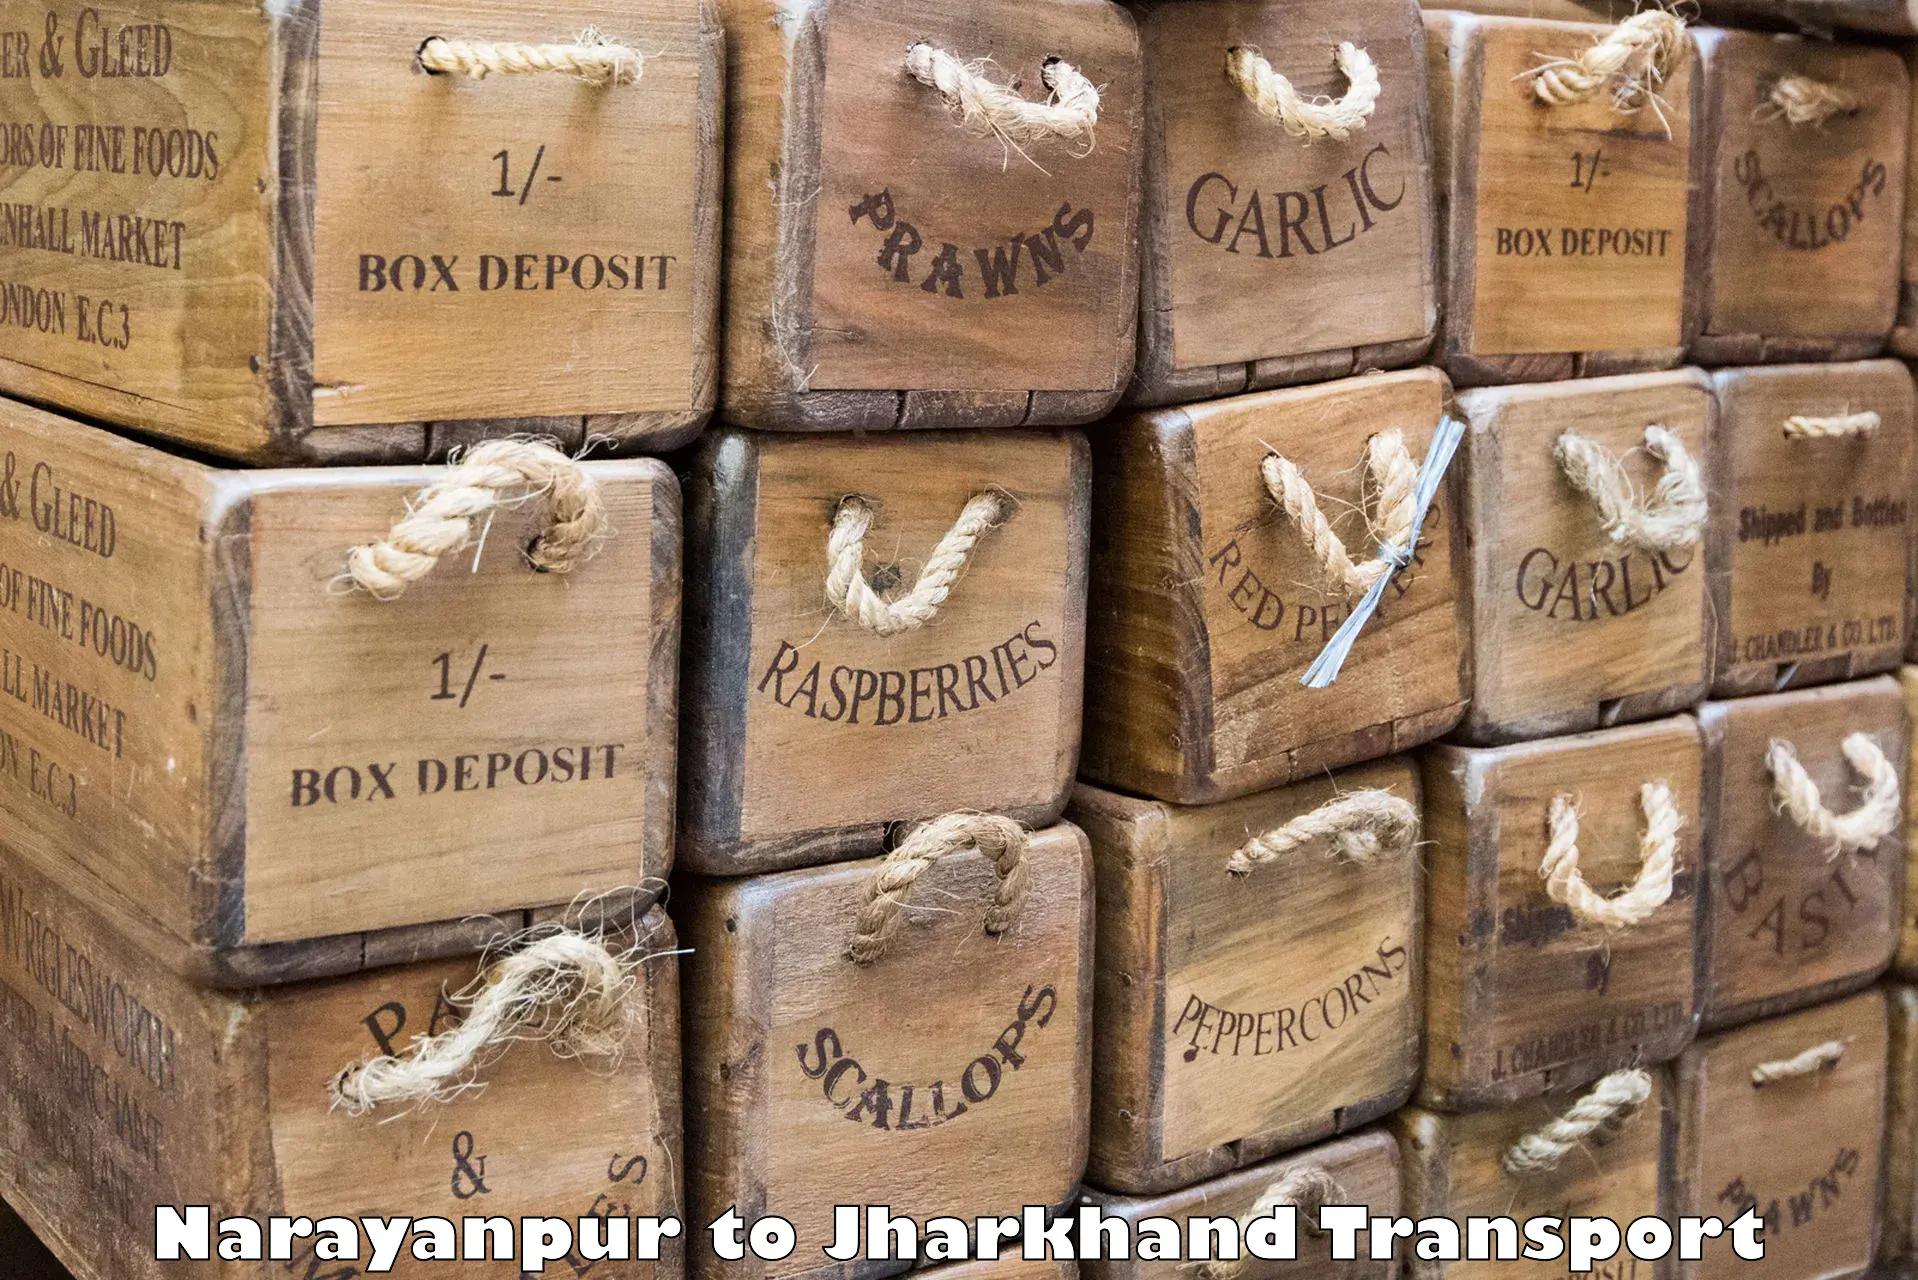 Air freight transport services Narayanpur to Chatra